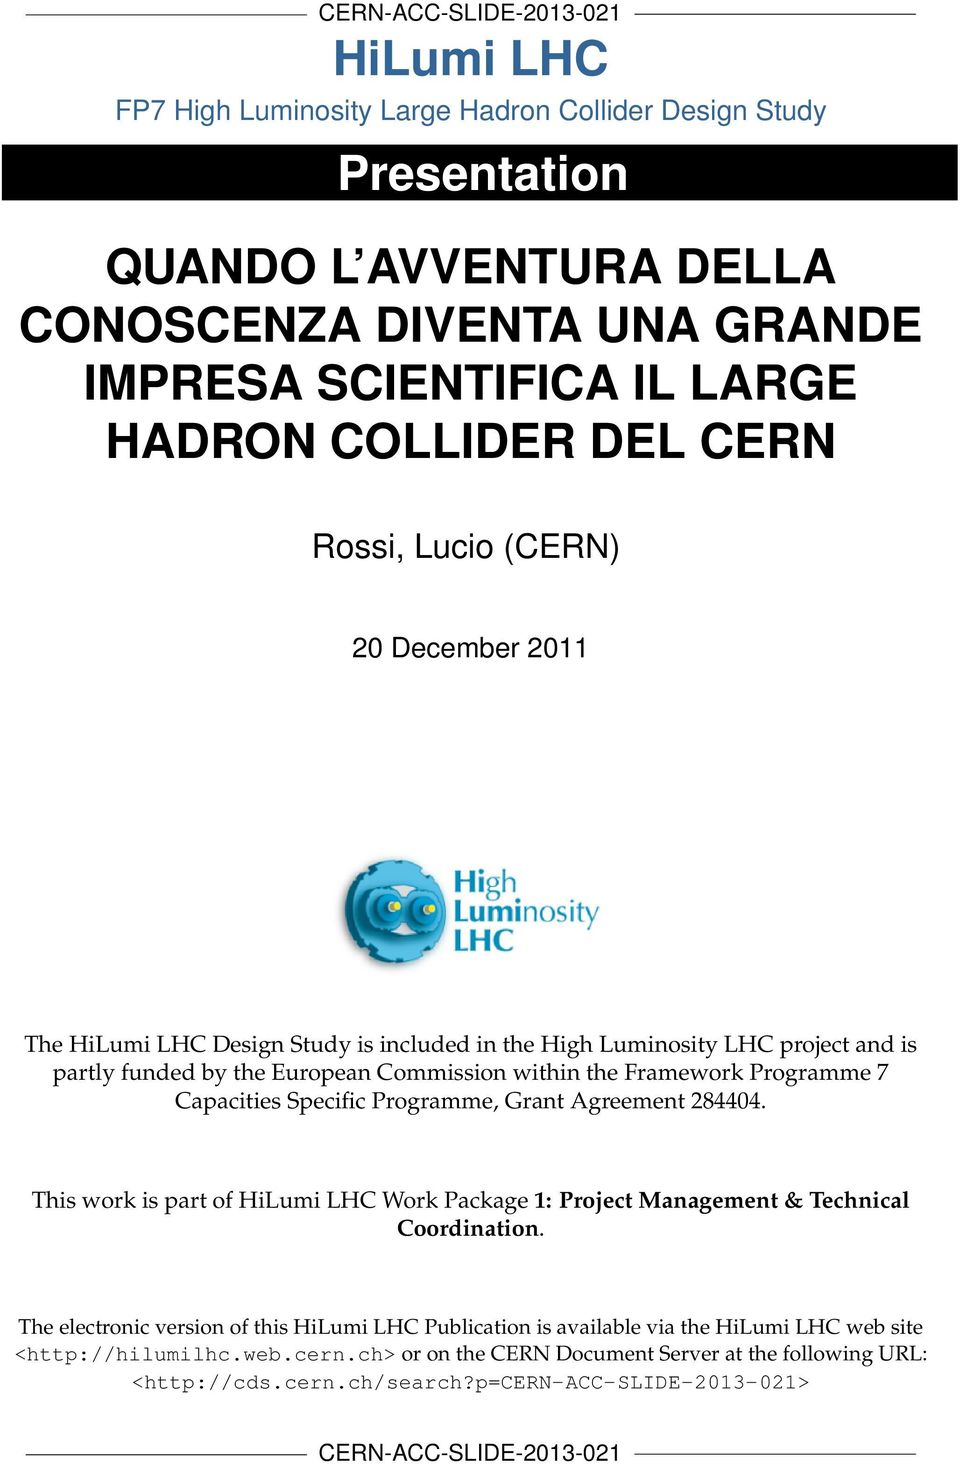 Programme 7 Capacities Specific Programme, Grant Agreement 284404. This work is part of HiLumi LHC Work Package 1: Project Management & Technical Coordination.